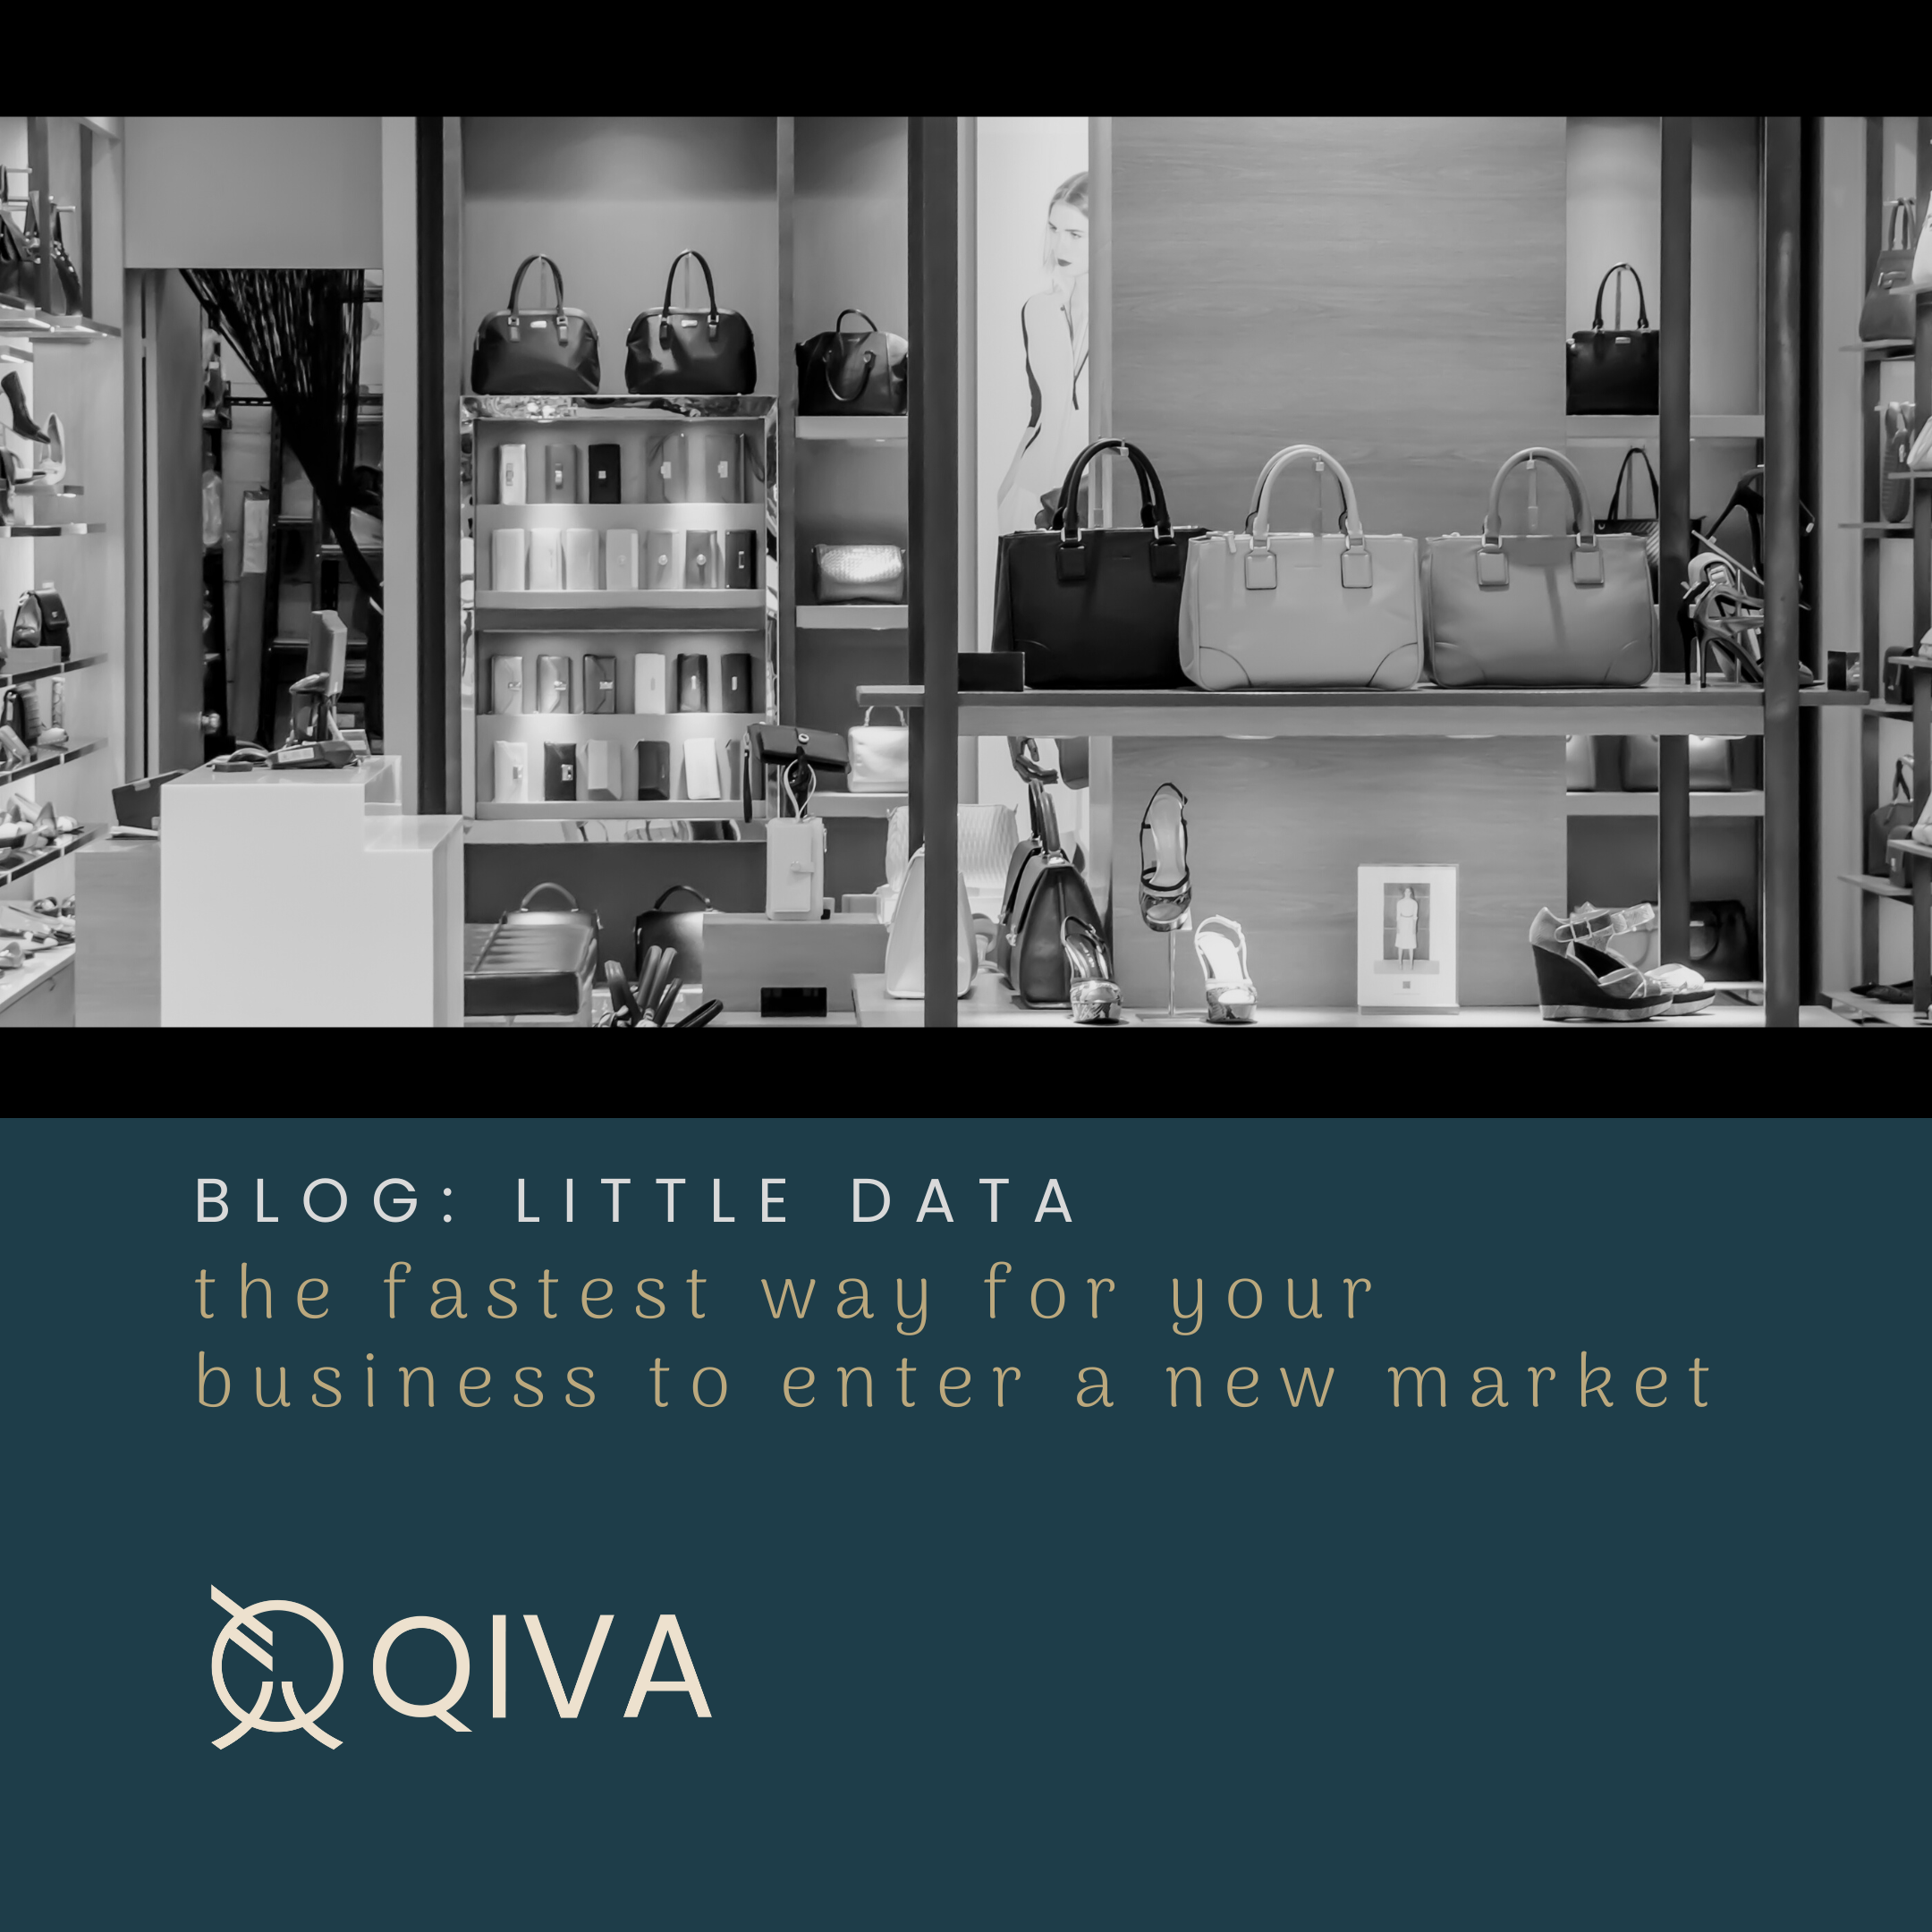 Little Data: the fastest way for your business to enter a new market